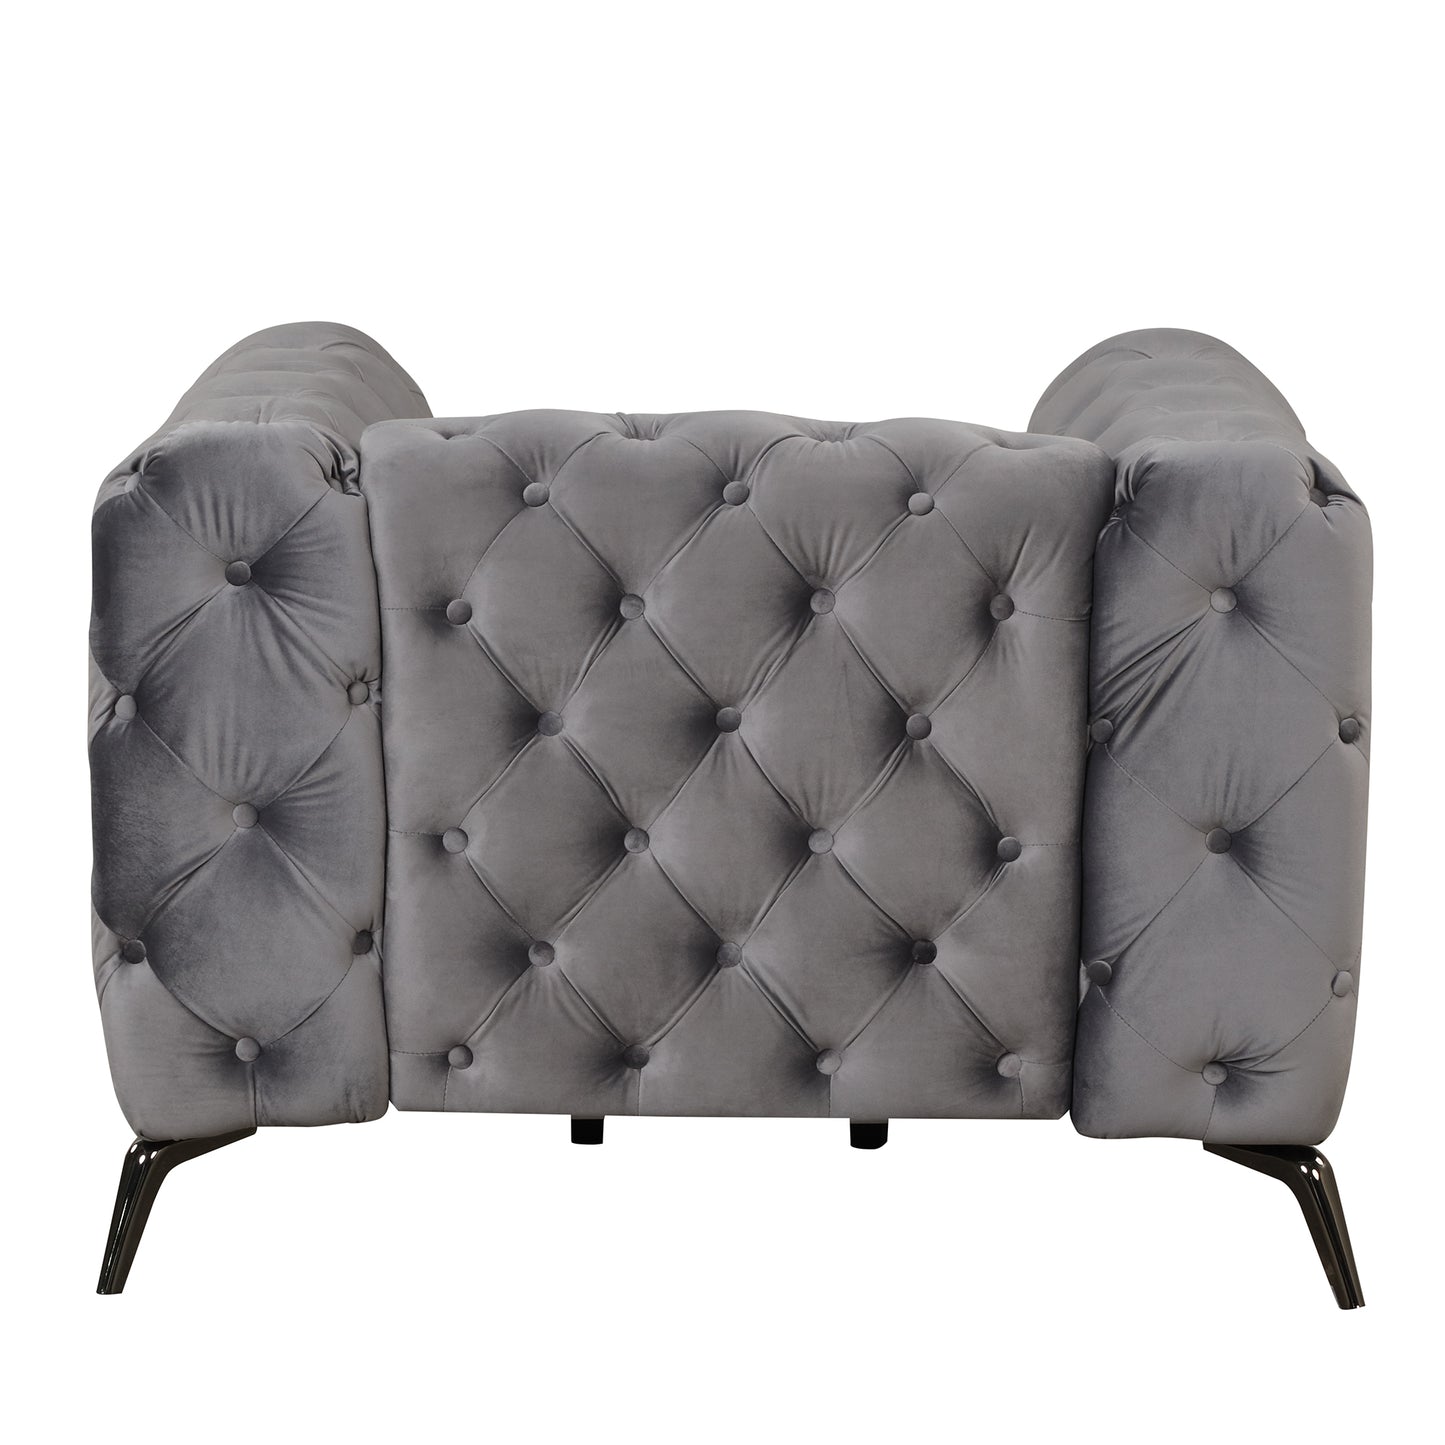 Velvet Upholstered Accent Chair with Button Tufted Back, Ideal for Living Room, Bedroom, or Small Spaces - 40.5 Inch, Gray